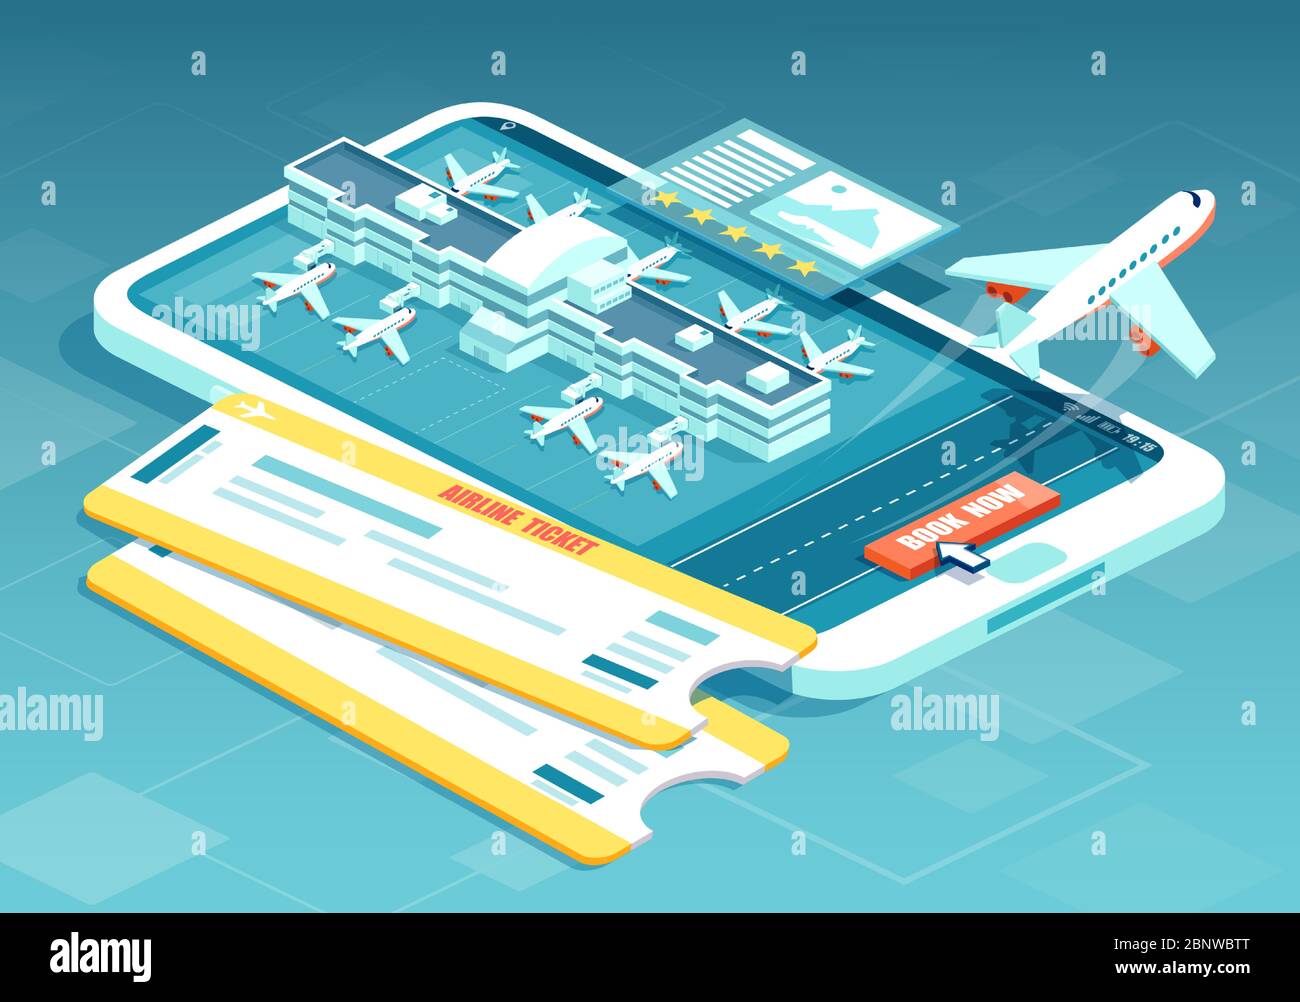 Booking airline tickets online concept. Vector of a travel, business flights with boarding pass, airport terminals and airplane taking off Stock Vector